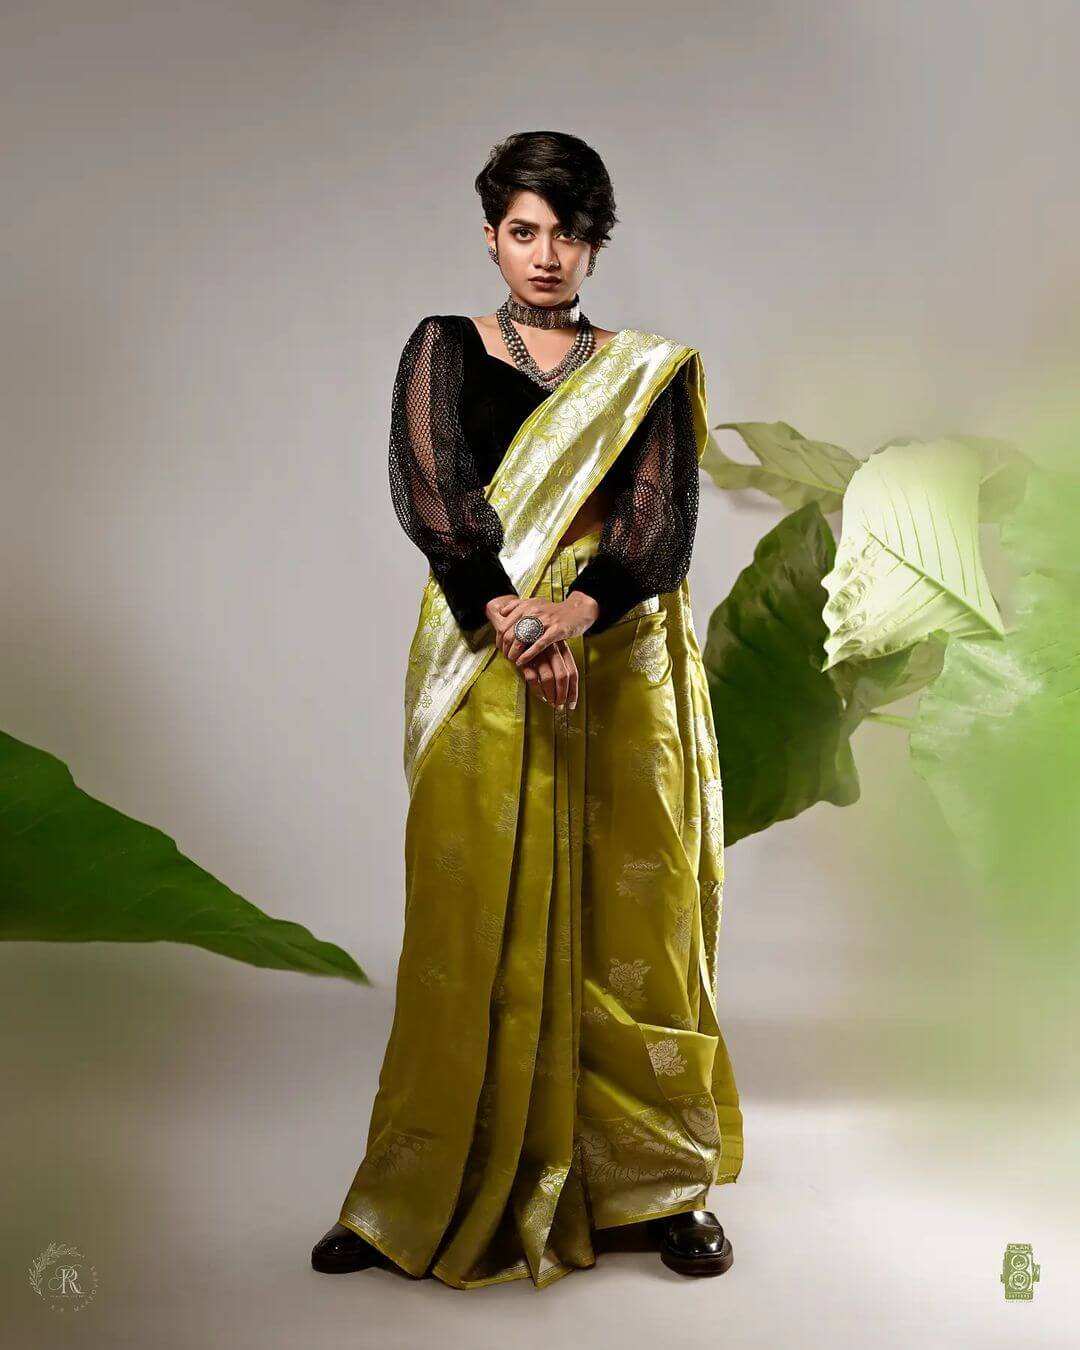 Anarkali Marikar Dapper Look In Green Saree With Black Full Puffed Sleeves Blouse Styled With Black Shoes